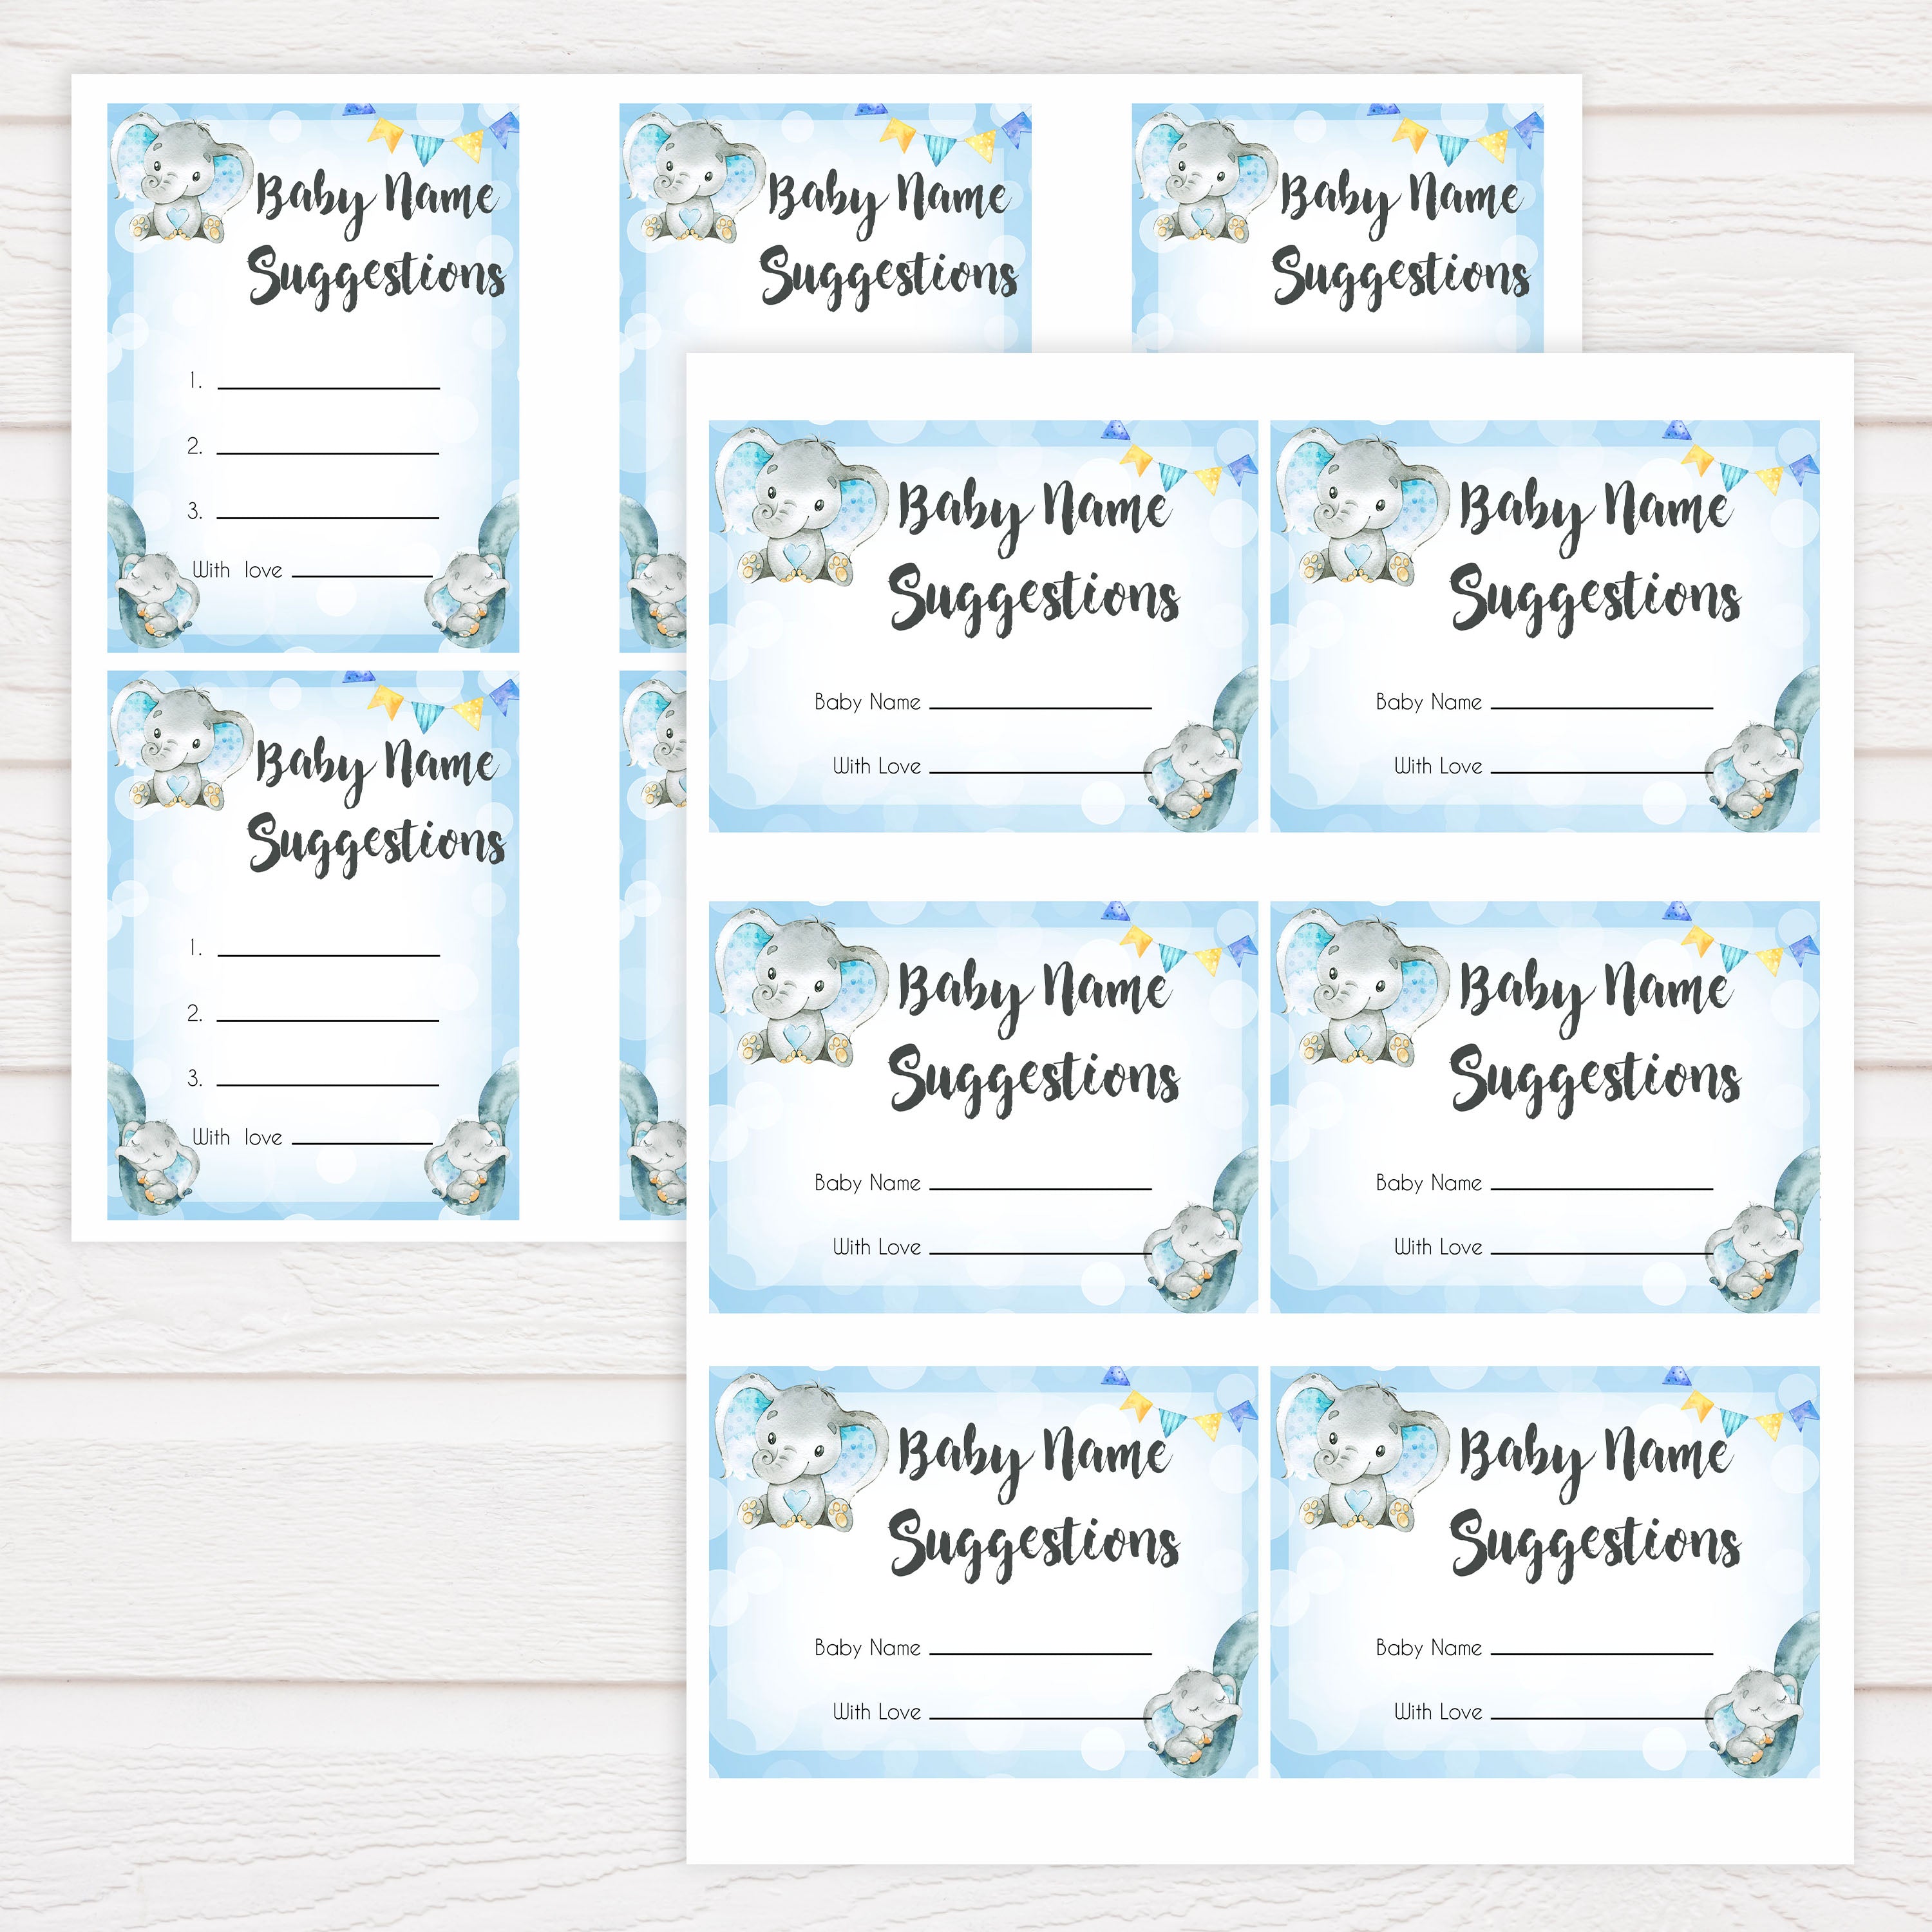  Blue elephant baby games, baby name suggestions, elephant baby games, printable baby games, top baby games, best baby shower games, baby shower ideas, fun baby games, elephant baby shower